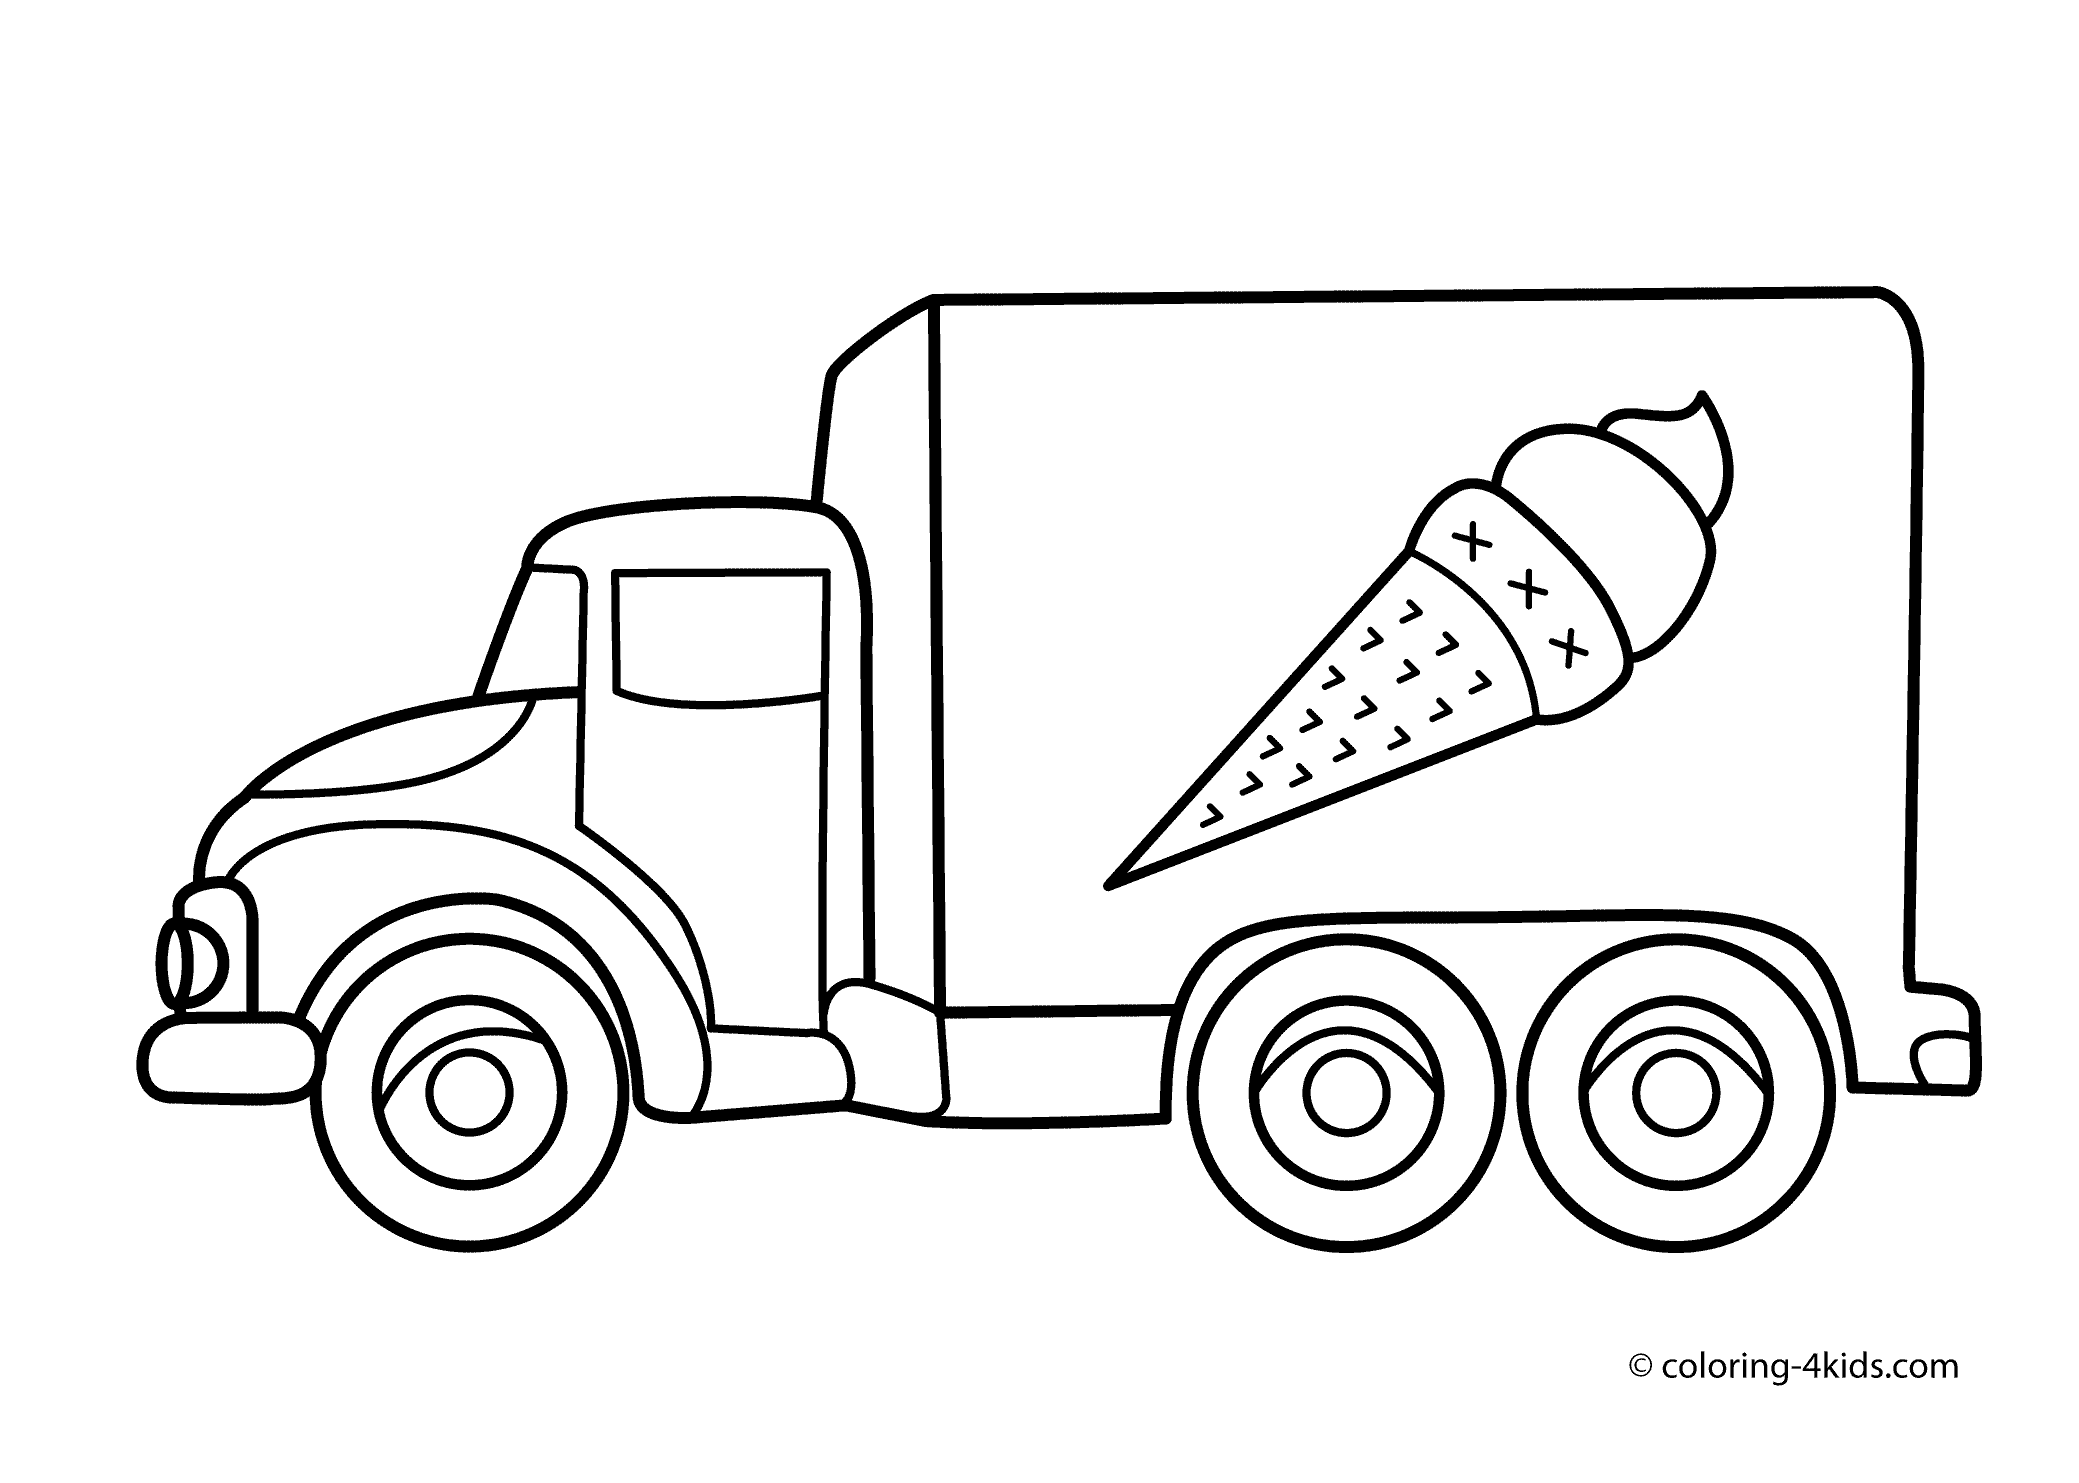 coloring pictures of cars and trucks dodge car longhorn truck coloring pages coloring sky cars pictures of and coloring trucks 